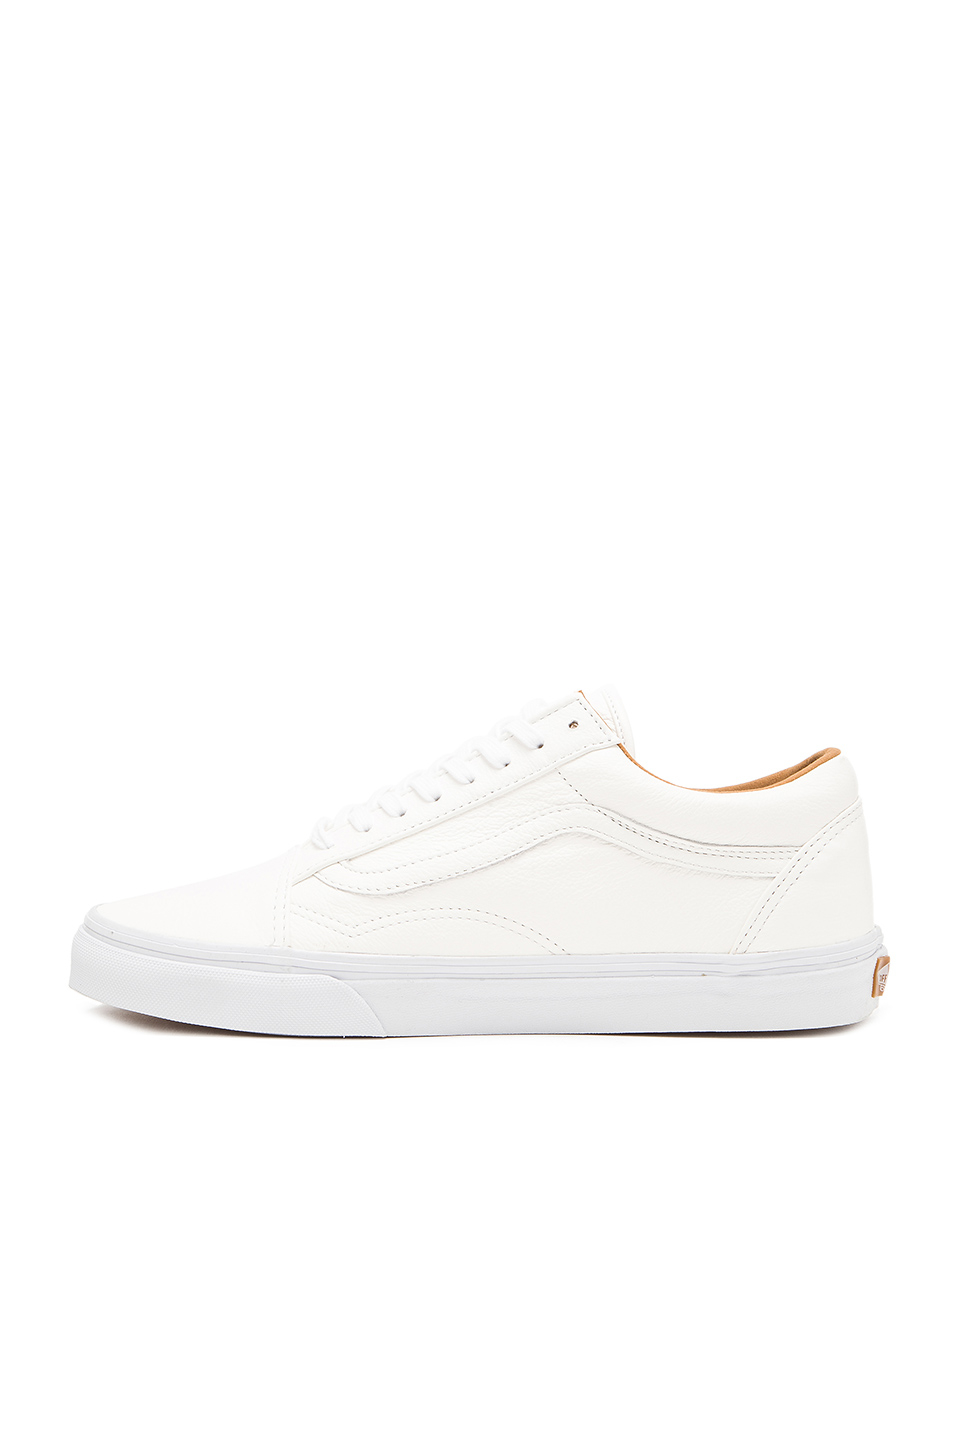 vans old skool leather trainers in white